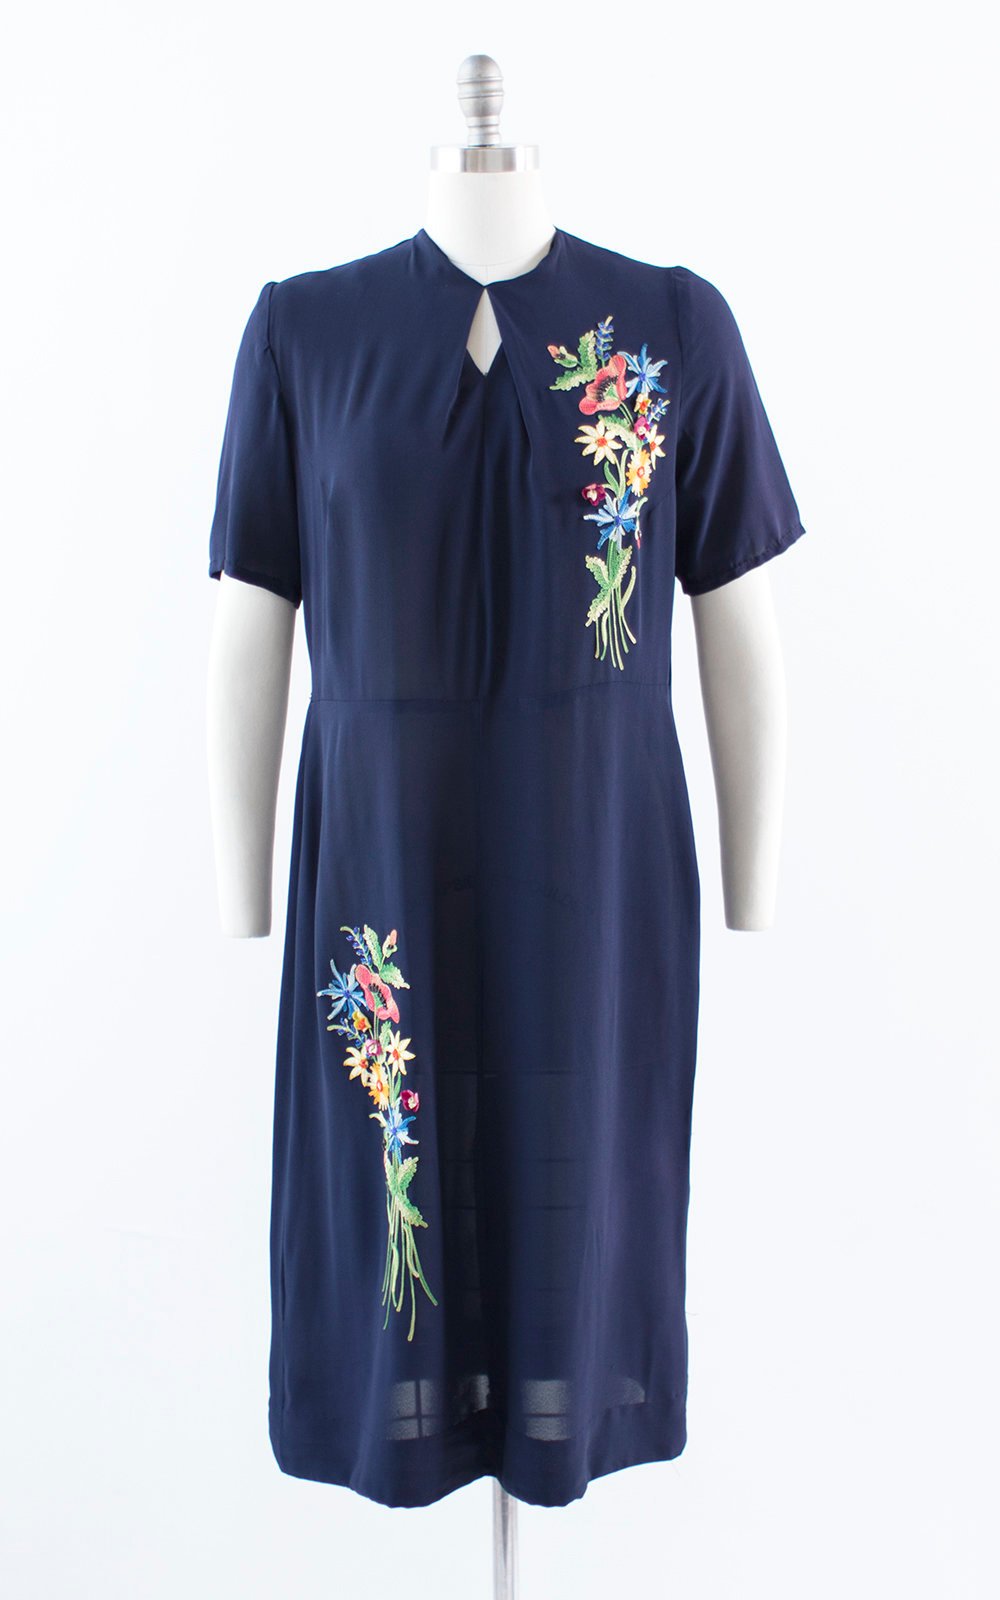 Vintage 1940s Dress | 40s Floral Chainstitch Embroidered Dark Navy Blue Rayon Cocktail Sheath Dress (large/x-large)